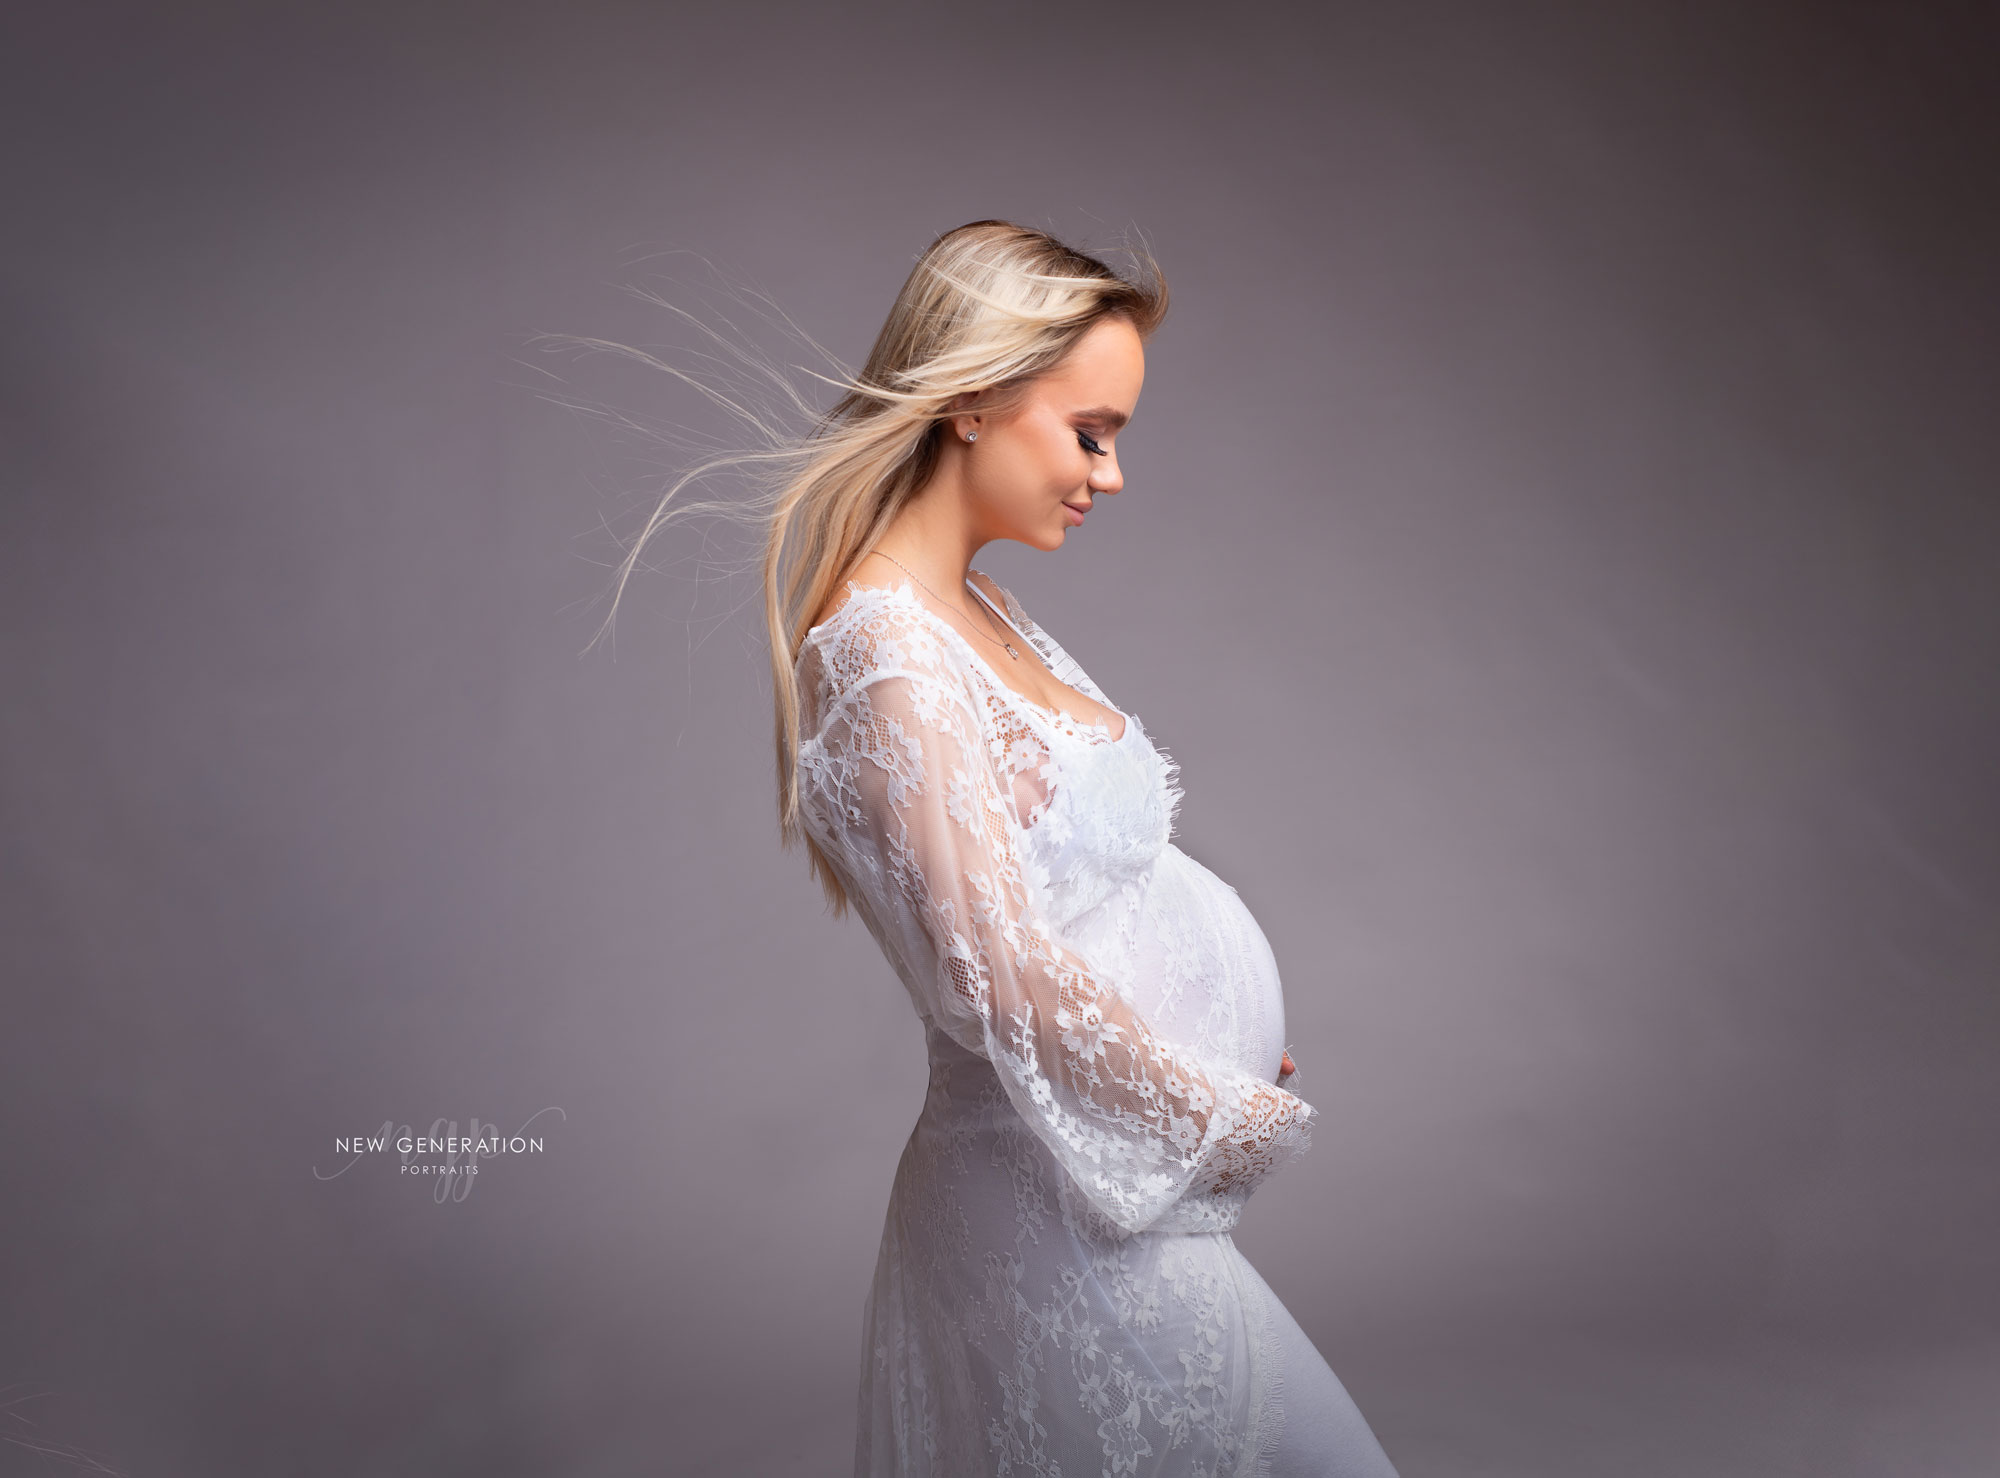 Timeless elegant maternity portrait in white dress with grey background captured at New Generation Portraits